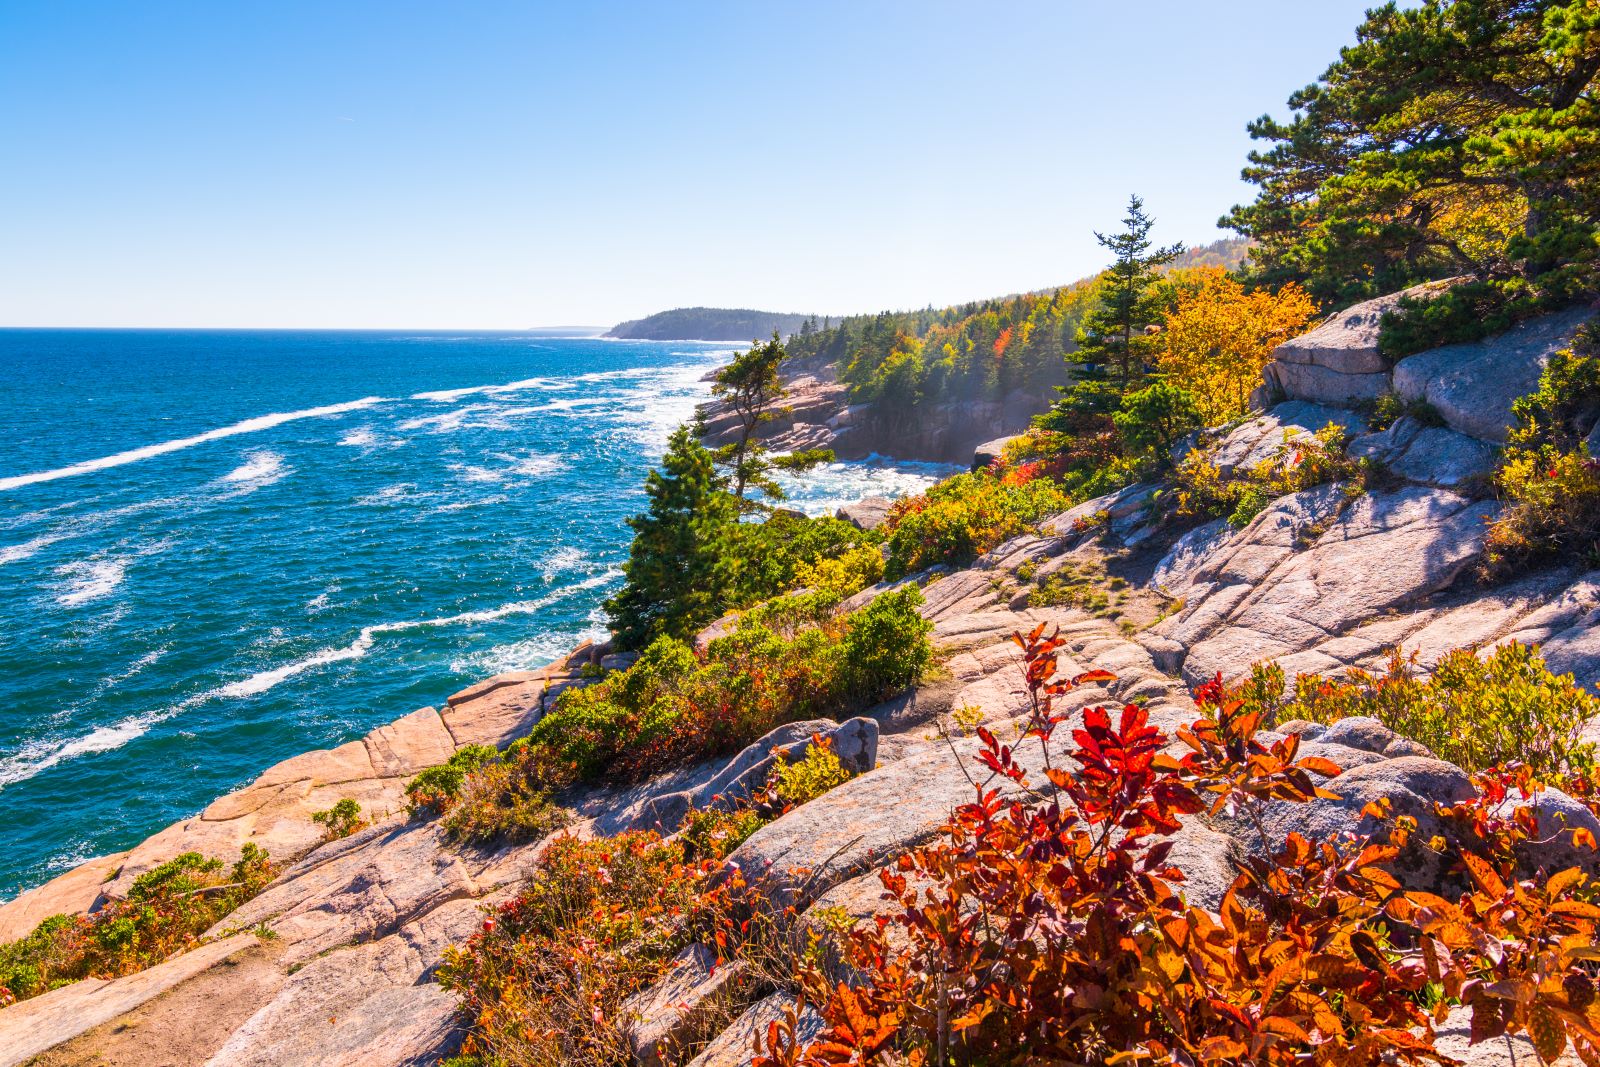 <p class="wp-caption-text">Image Credit: Shutterstock / Eric Urquhart</p>  <p>Explore the first Eastern National Park for breathtaking views atop Cadillac Mountain and serene mornings by Jordan Pond. It’s an outdoor enthusiast’s paradise, offering everything from luxury inn stays to campgrounds under the stars.</p>